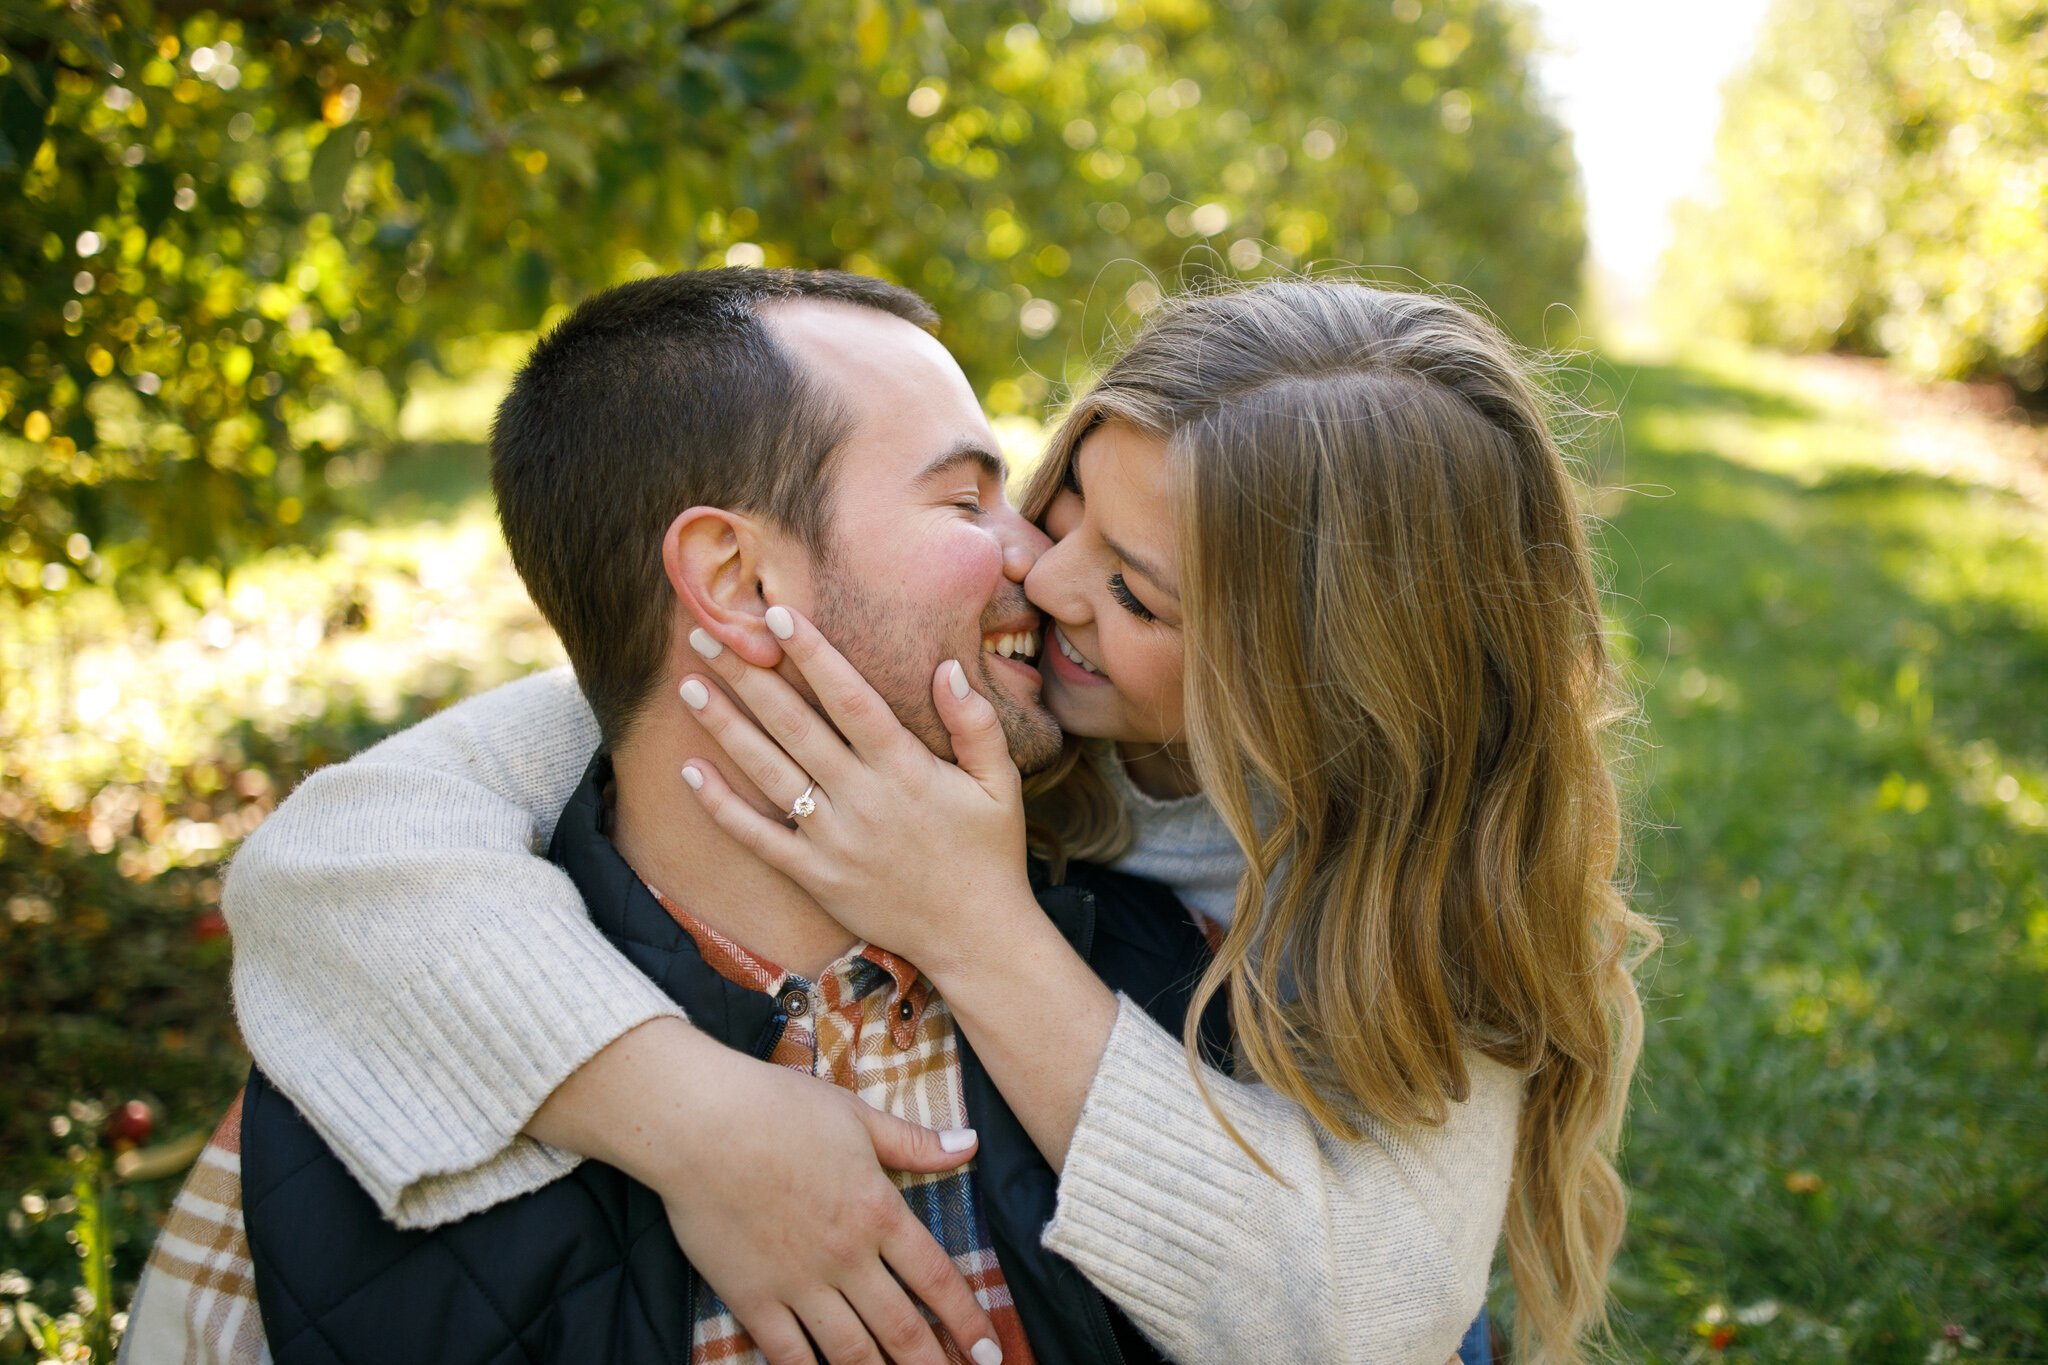 Libby and Alex Engaged Preview 2020 - Grand Rapids Wedding Photographer - J Darling Photo016.jpg